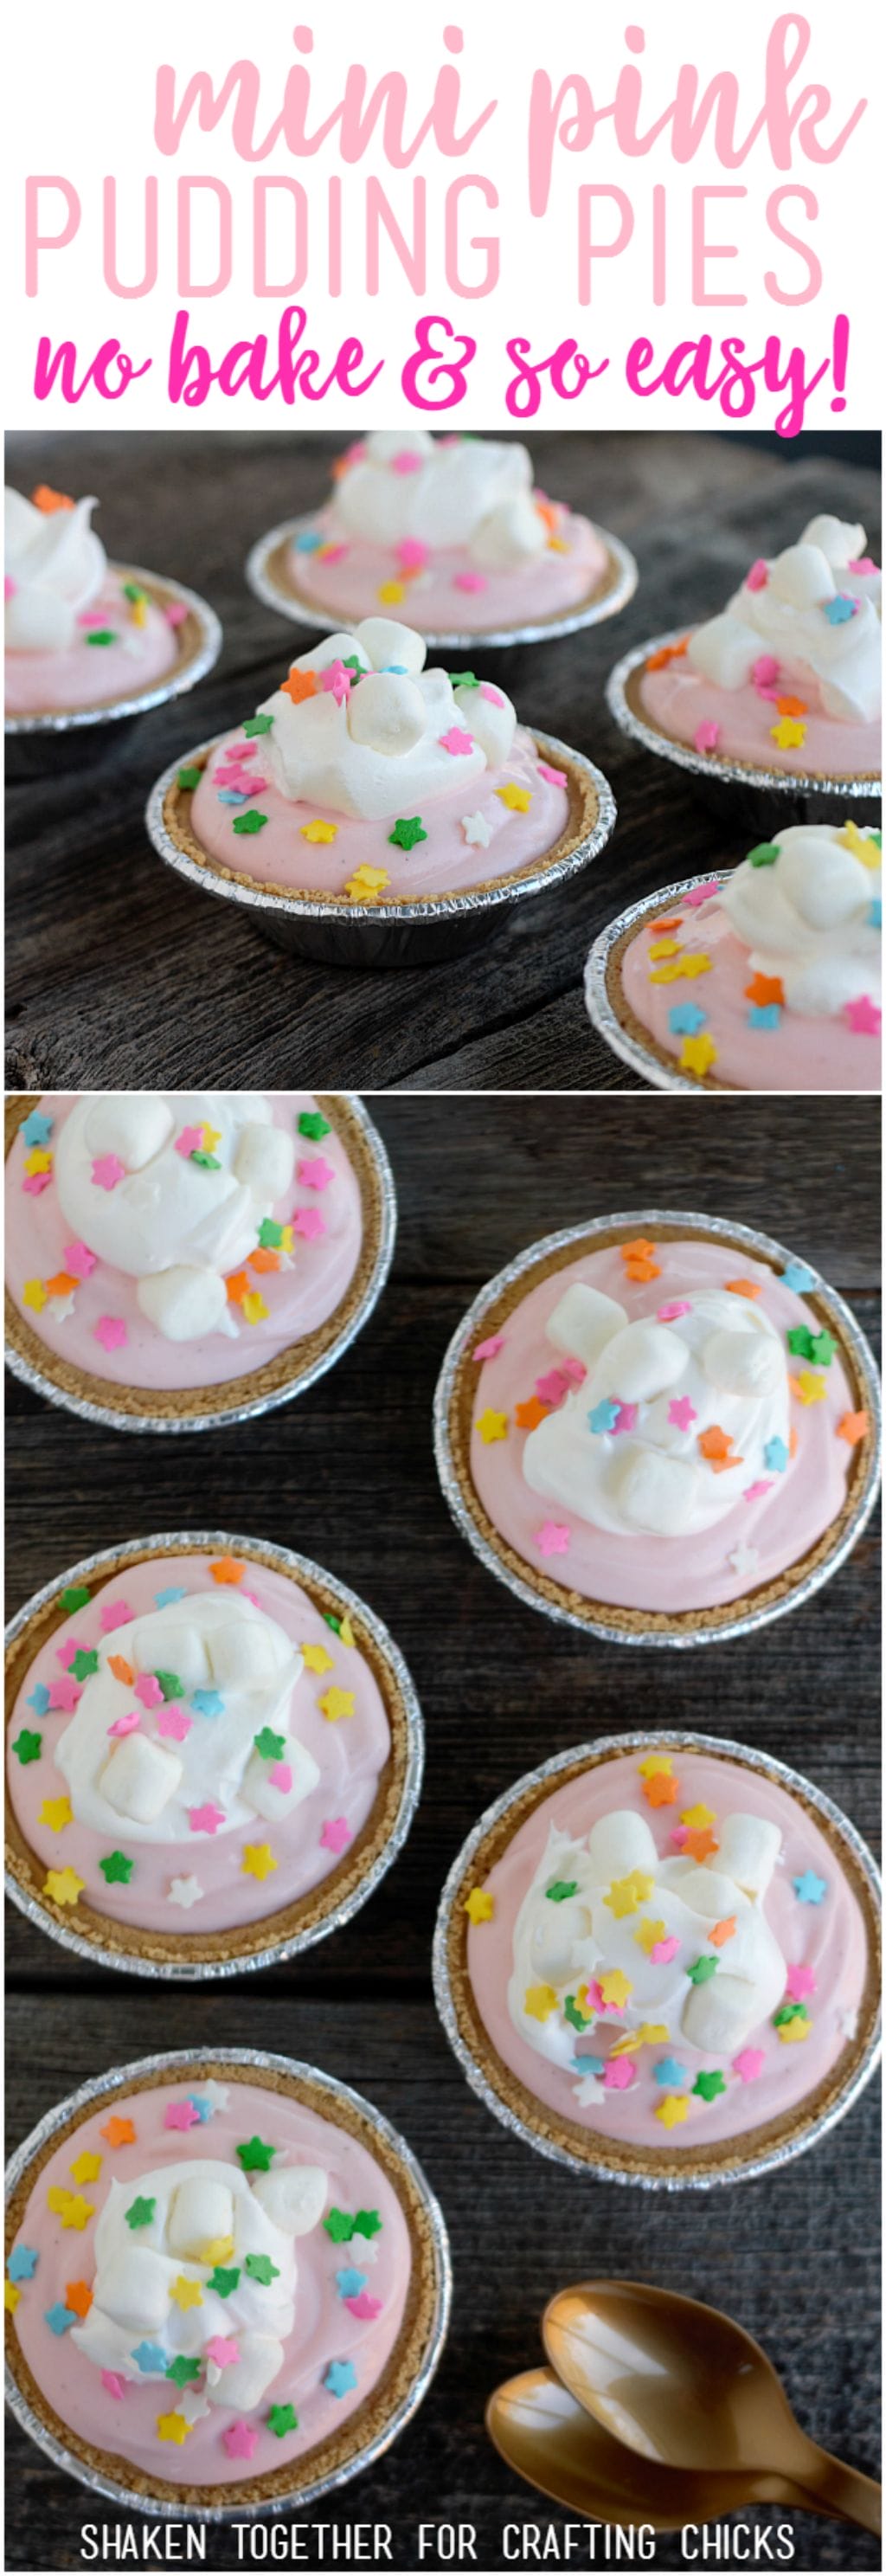 Mini Pink Pudding Pies! These adorable sweet, strawberry no bake pies are as delicious as they are easy!